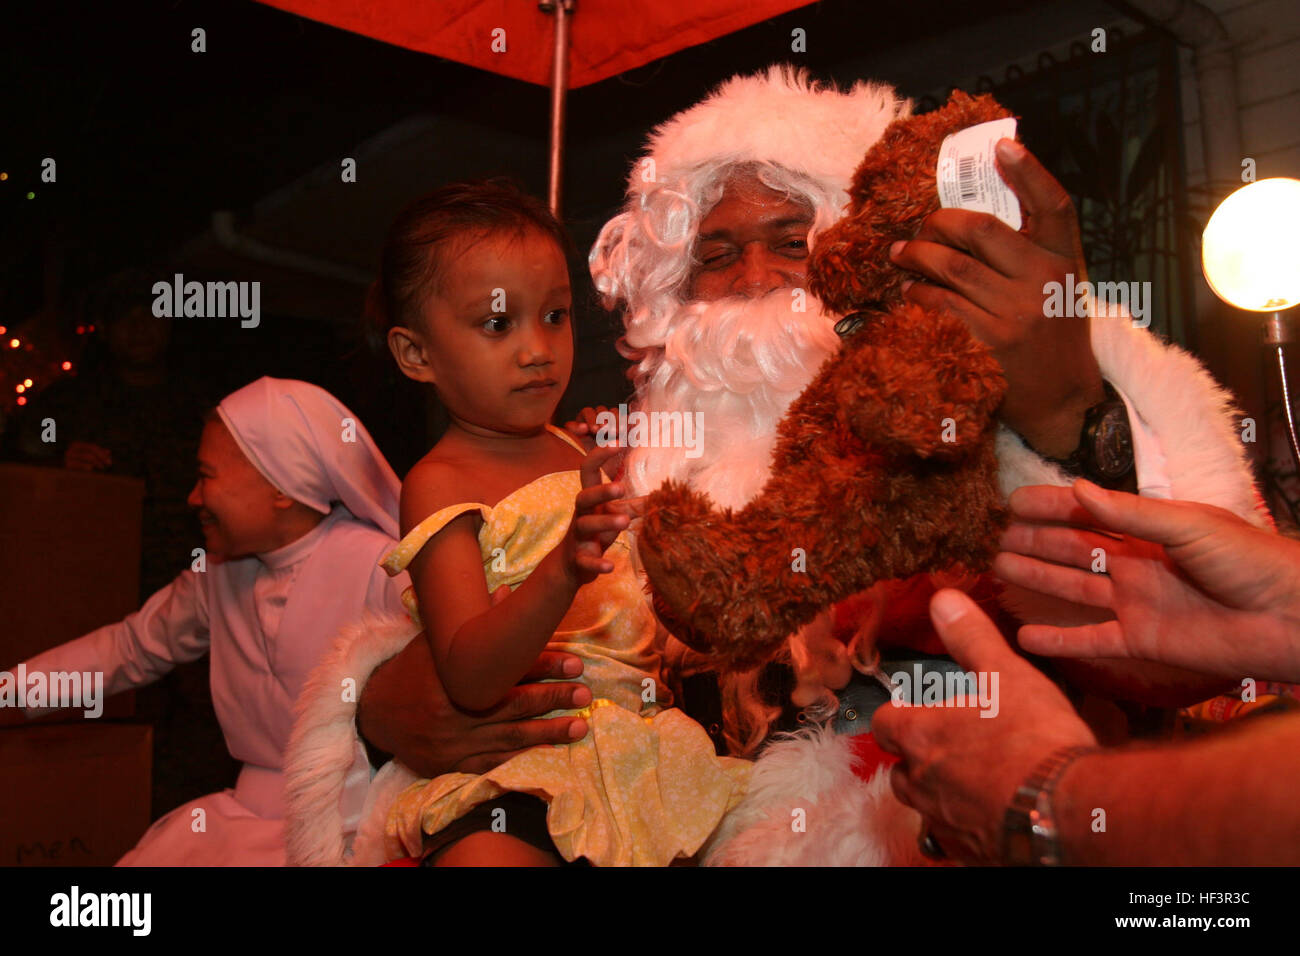 U.S. Marine Master Gunnery Sgt. Joseph Haggins, dressed as Santa Claus, present gifts to Filipino children during Operation Goodwill at Our Lady of Peace, Para'e, Republic of the Philippines, Dec. 15. Operation Goodwill is a chance for U.S. Marines and their families stationed in Okinawa, Japan, to help spread holiday spirit during the holiday season. Operation Goodwill gives hope to children, families in the Philippines DVIDS232177 Stock Photo